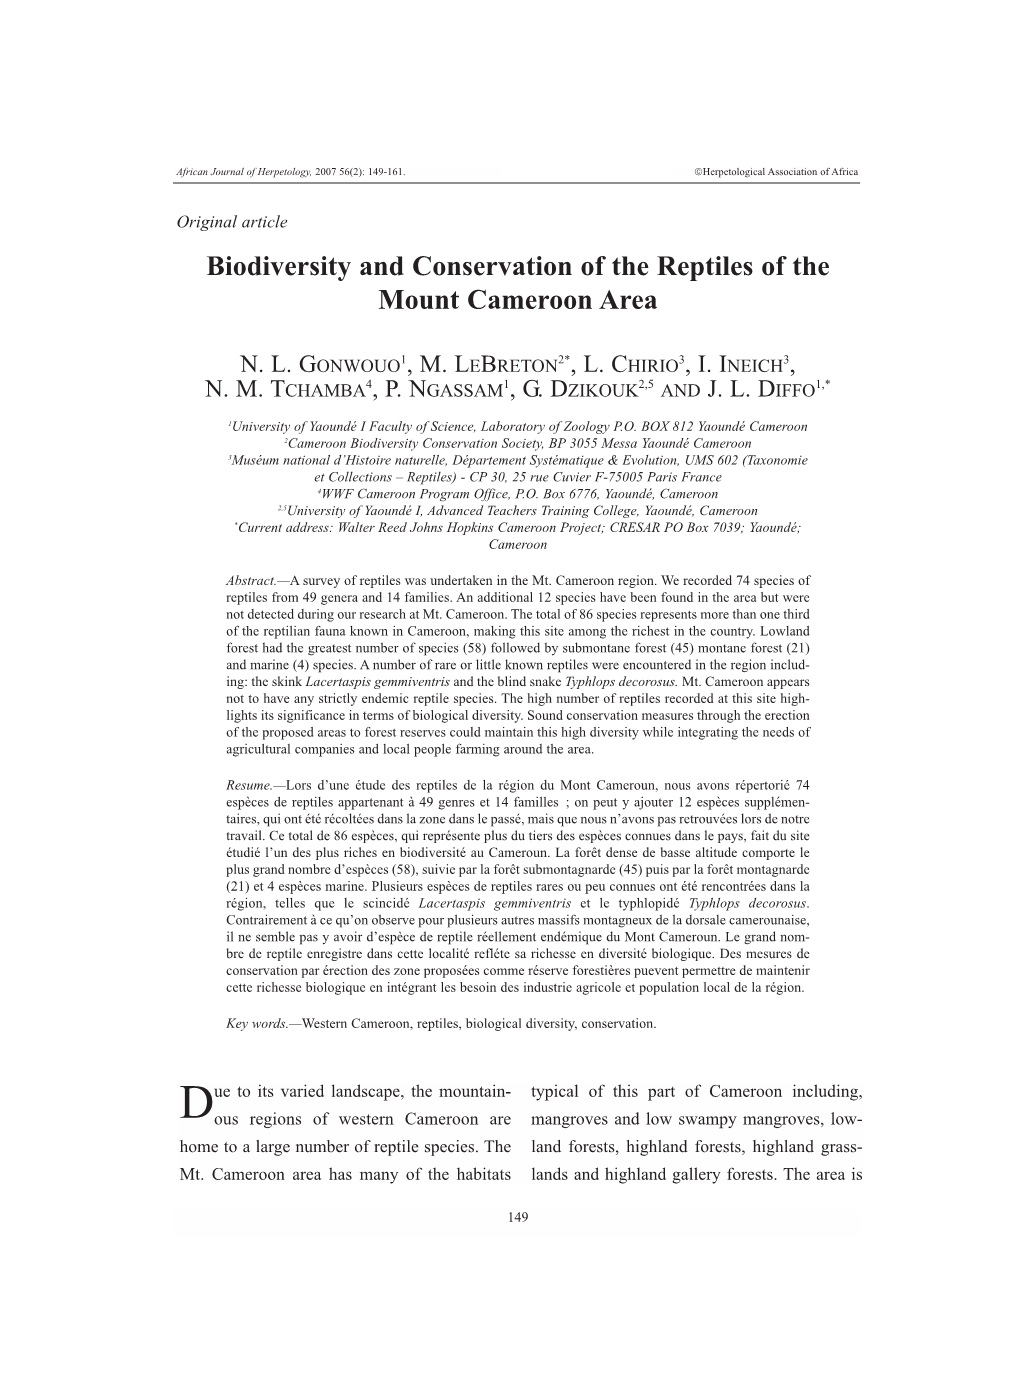 Biodiversity and Conservation of the Reptiles of the Mount Cameroon Area